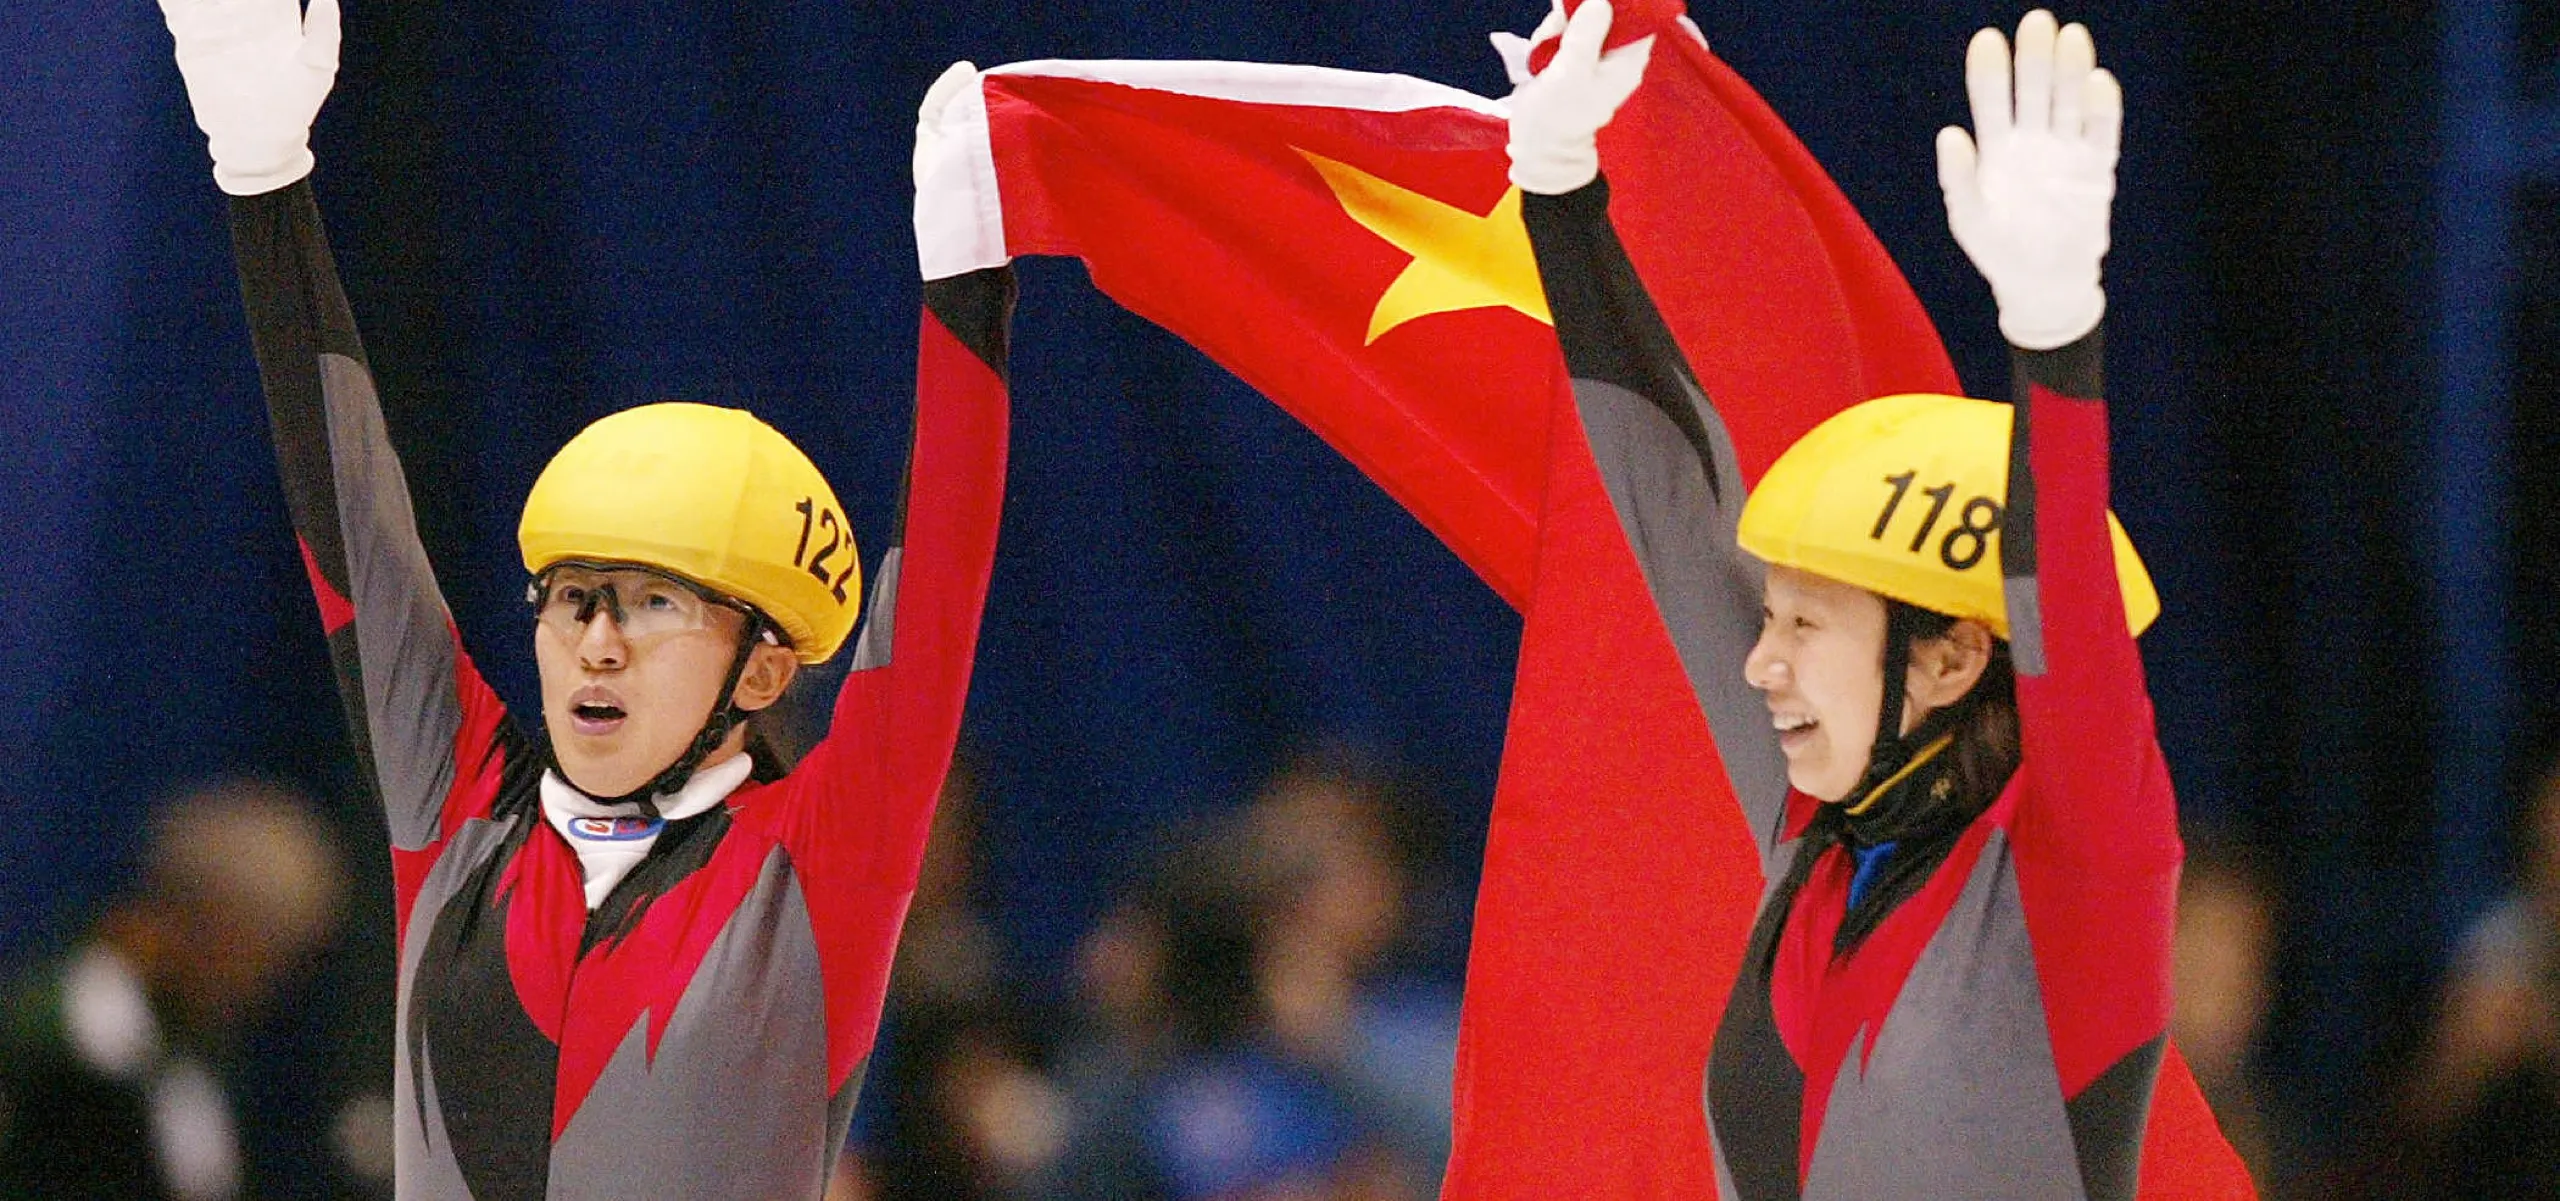 Chinese Olympians